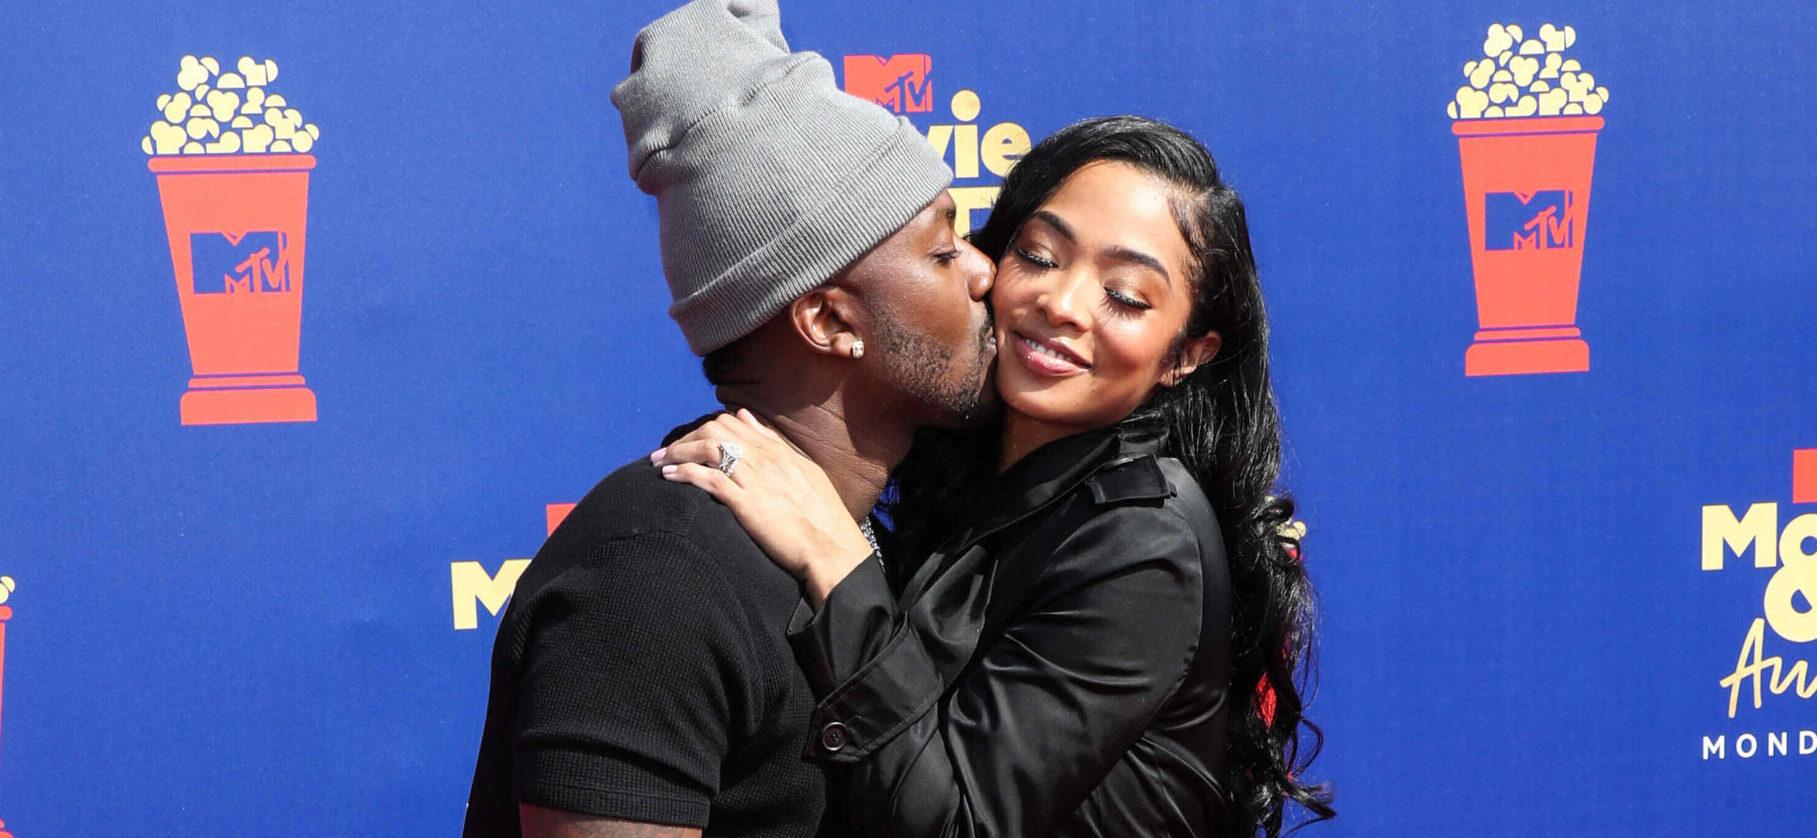 Ray J Surprises Wife Princess Love With New Maybach Drive For Birthday After Reconciliation